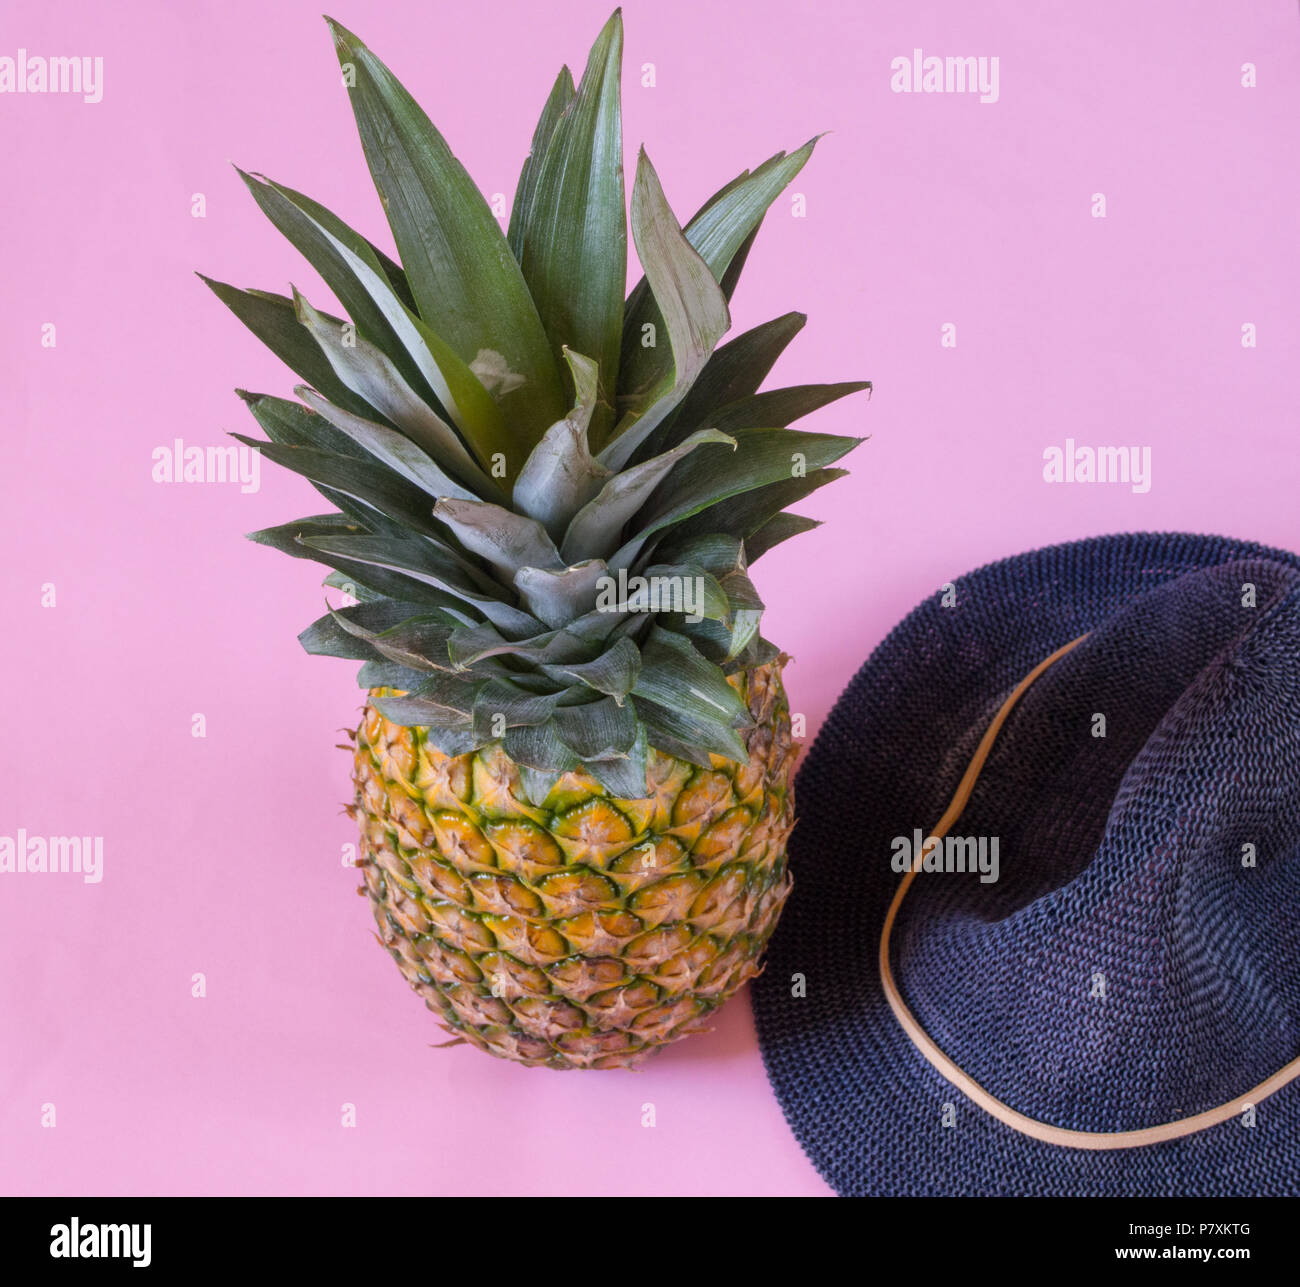 Pineapple and blue hat  on pink background Stock Photo